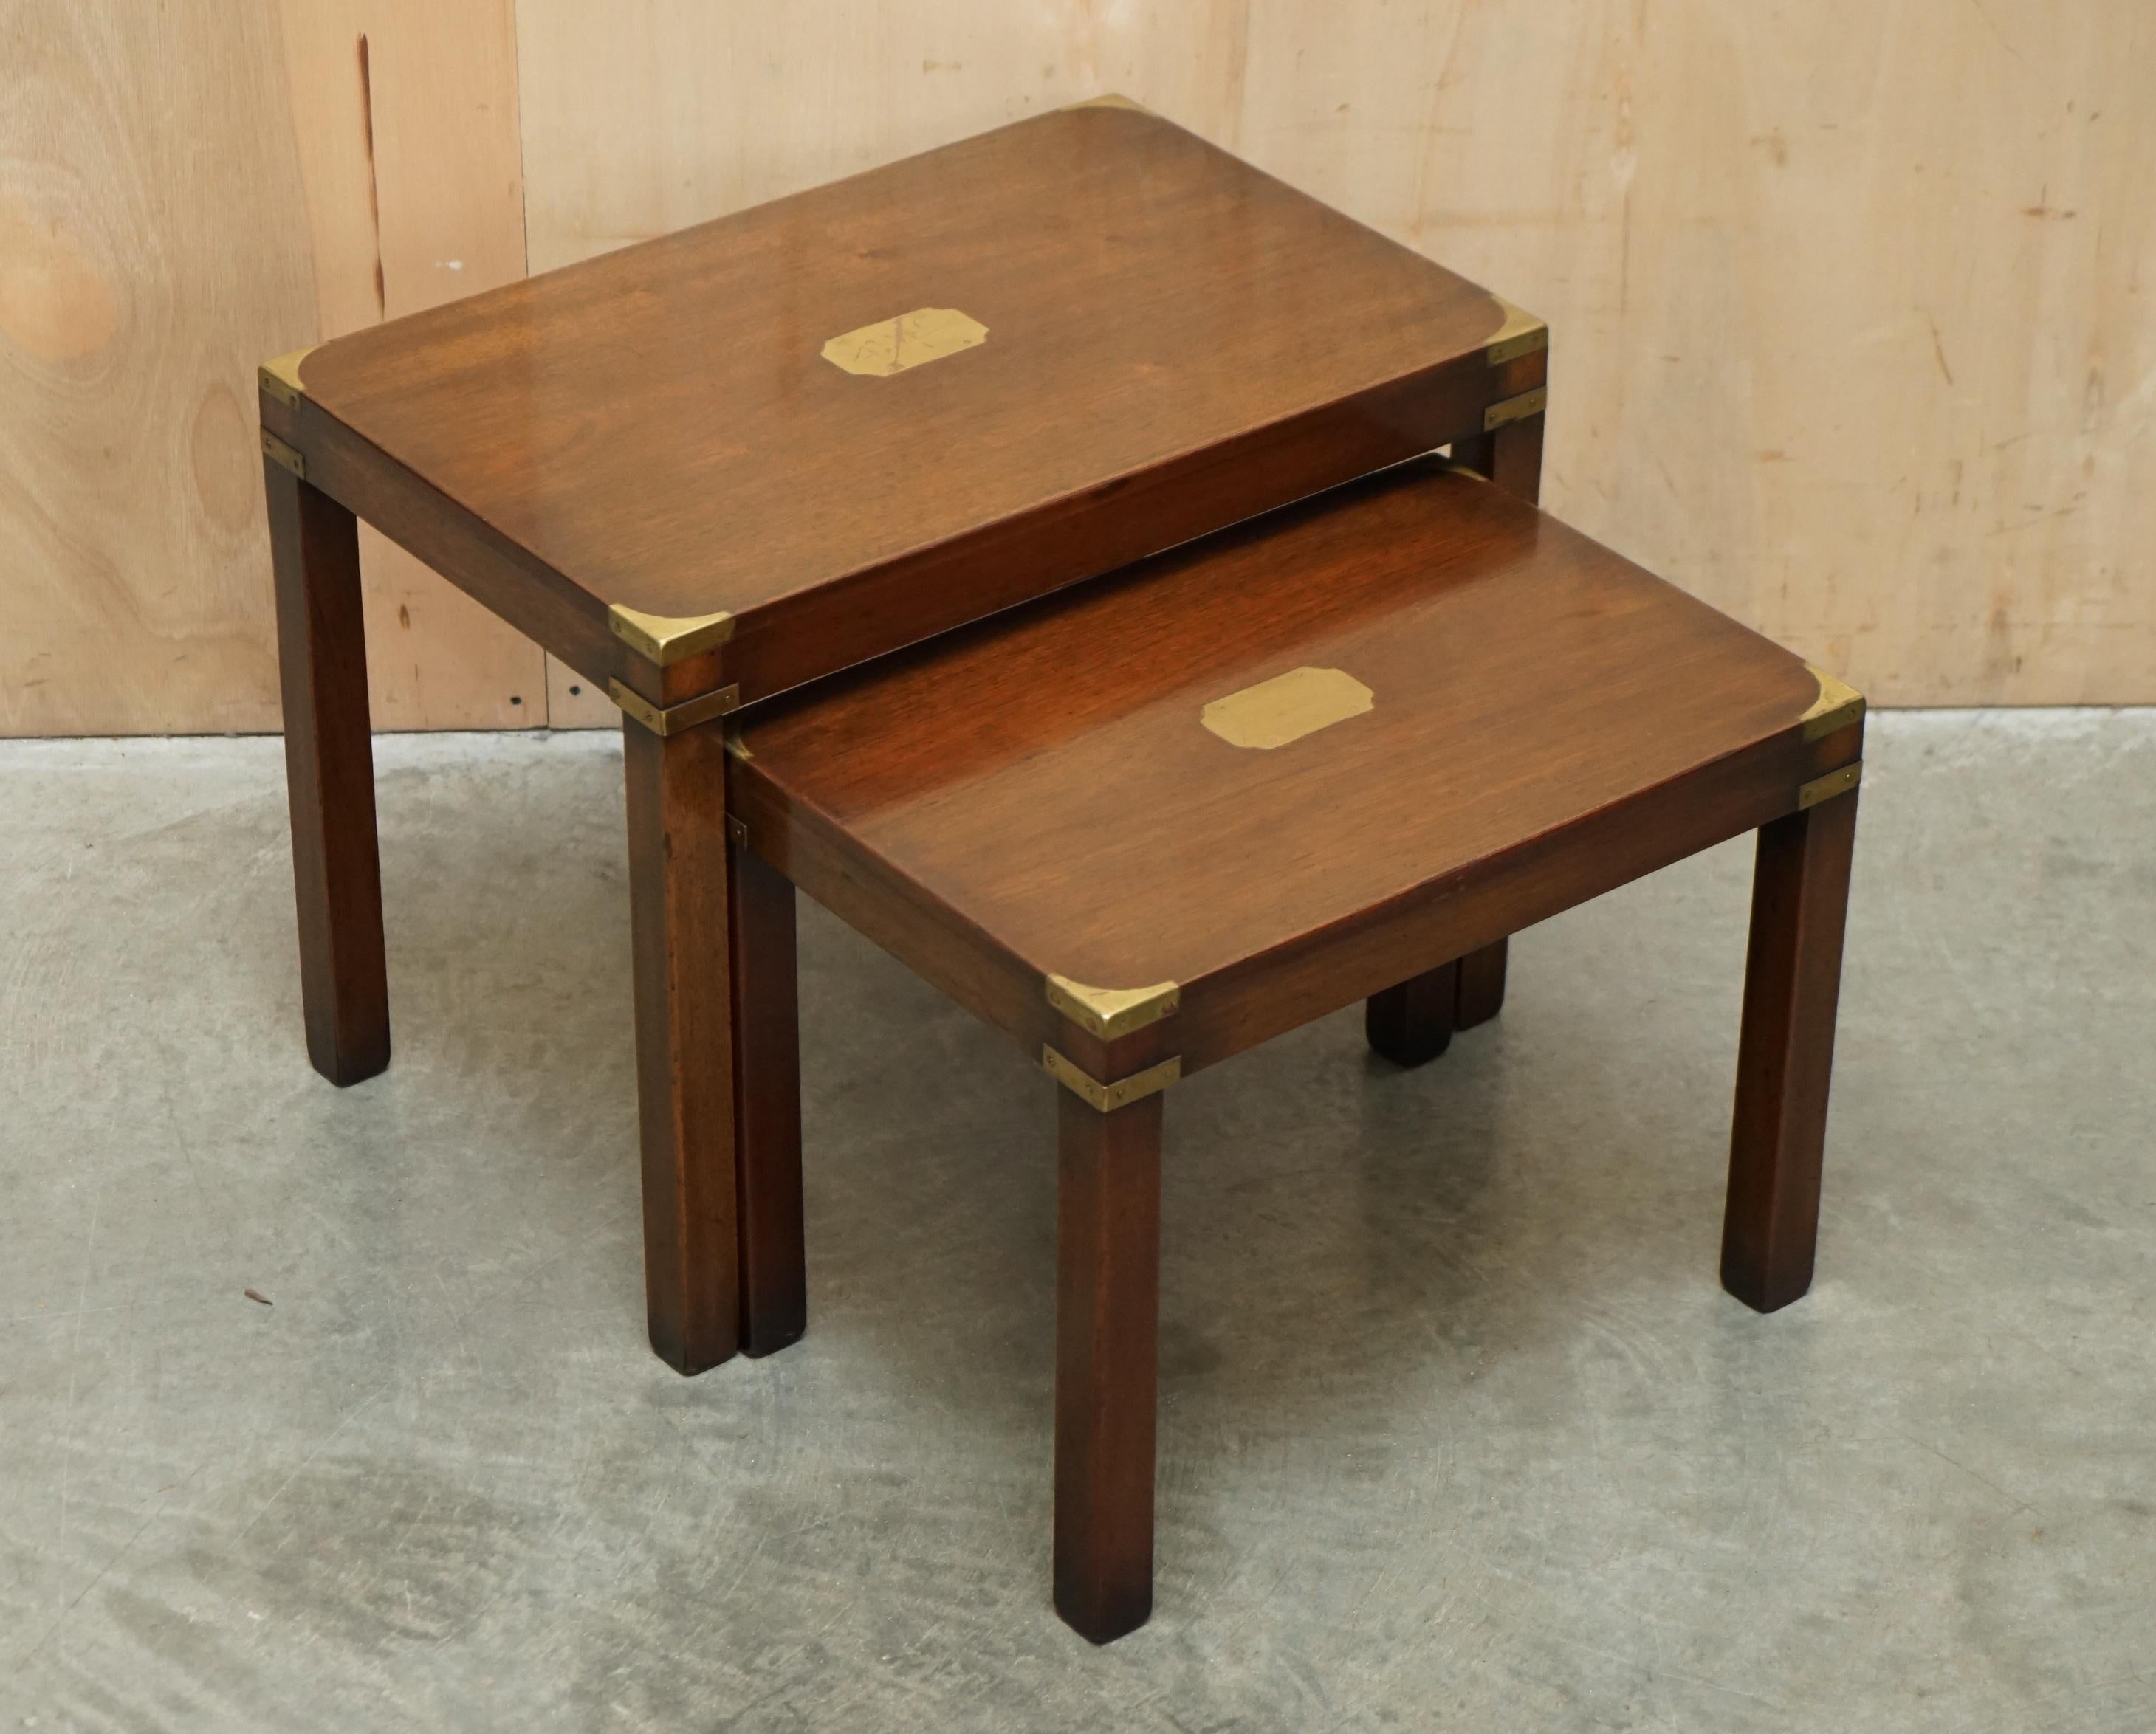 Royal House Antiques

Royal House Antiques is delighted to offer for sale this lovely Fully Restored Harrods Kennedy nest of two Military Campaign side tables

Please note the delivery fee listed is just a guide, it covers within the M25 only for